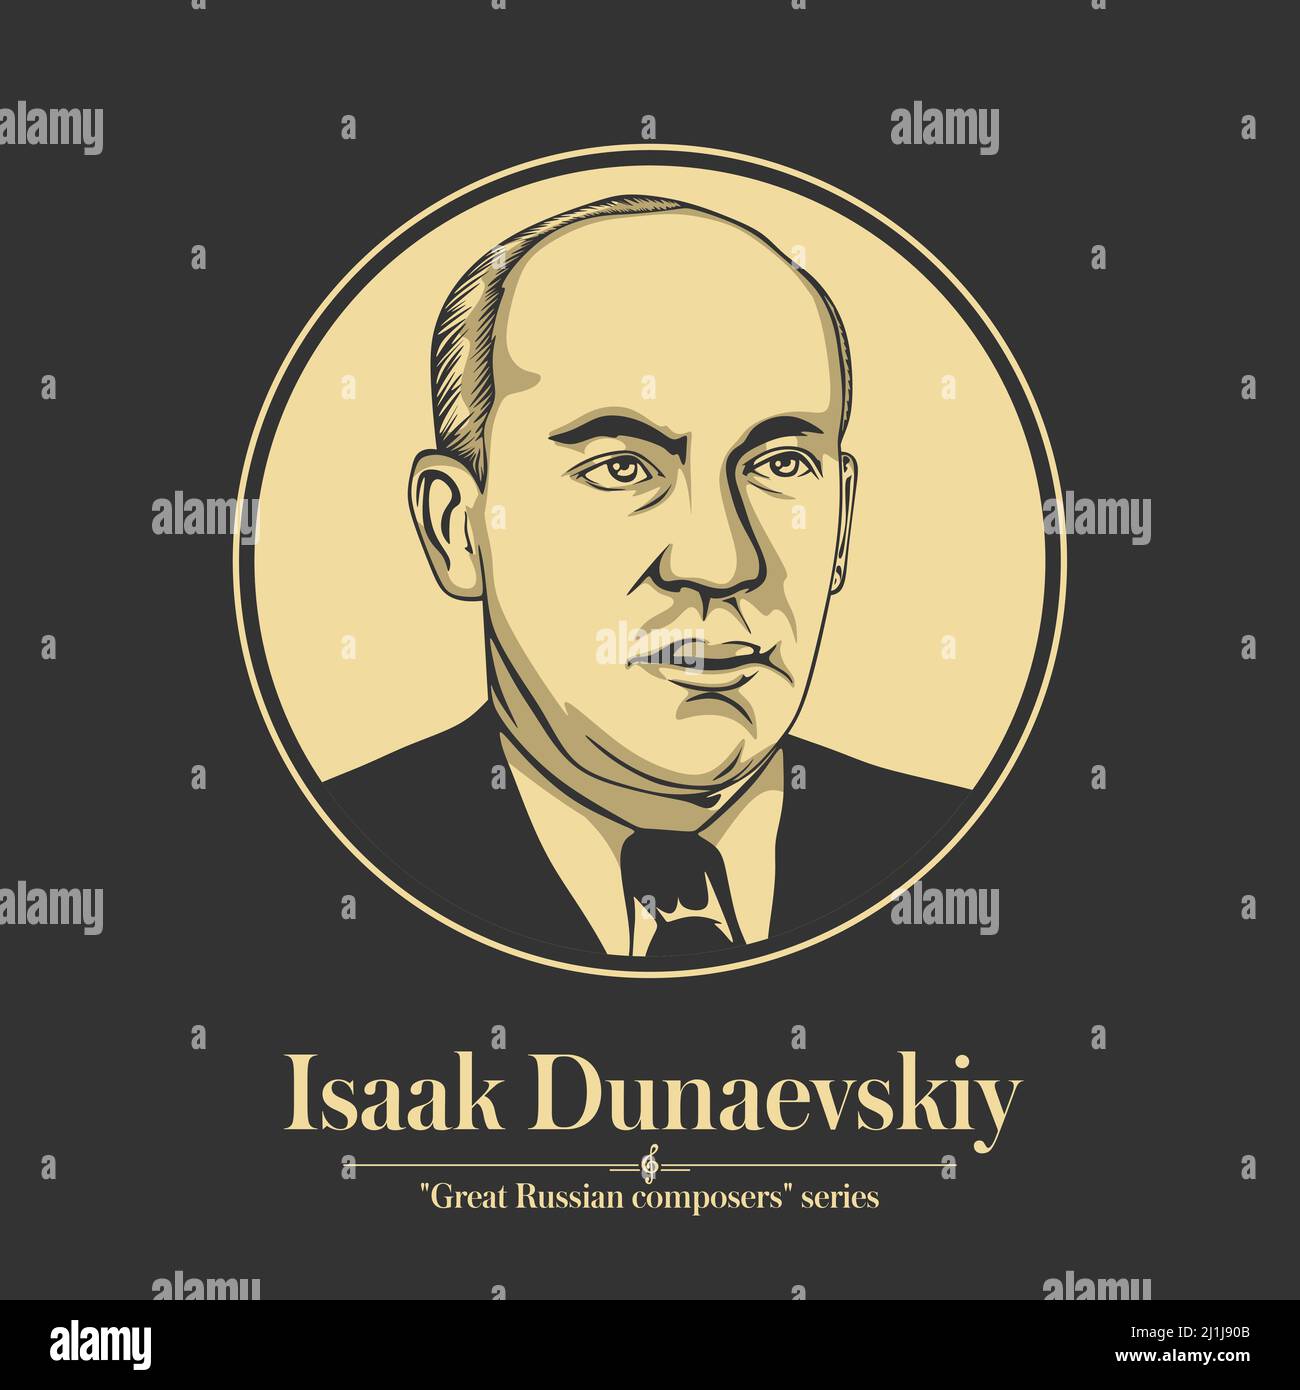 Great Russian composer. Isaak Dunaevskiy was a Soviet film composer and conductor of the 1930s and 1940s, who composed music for operetta Stock Vector